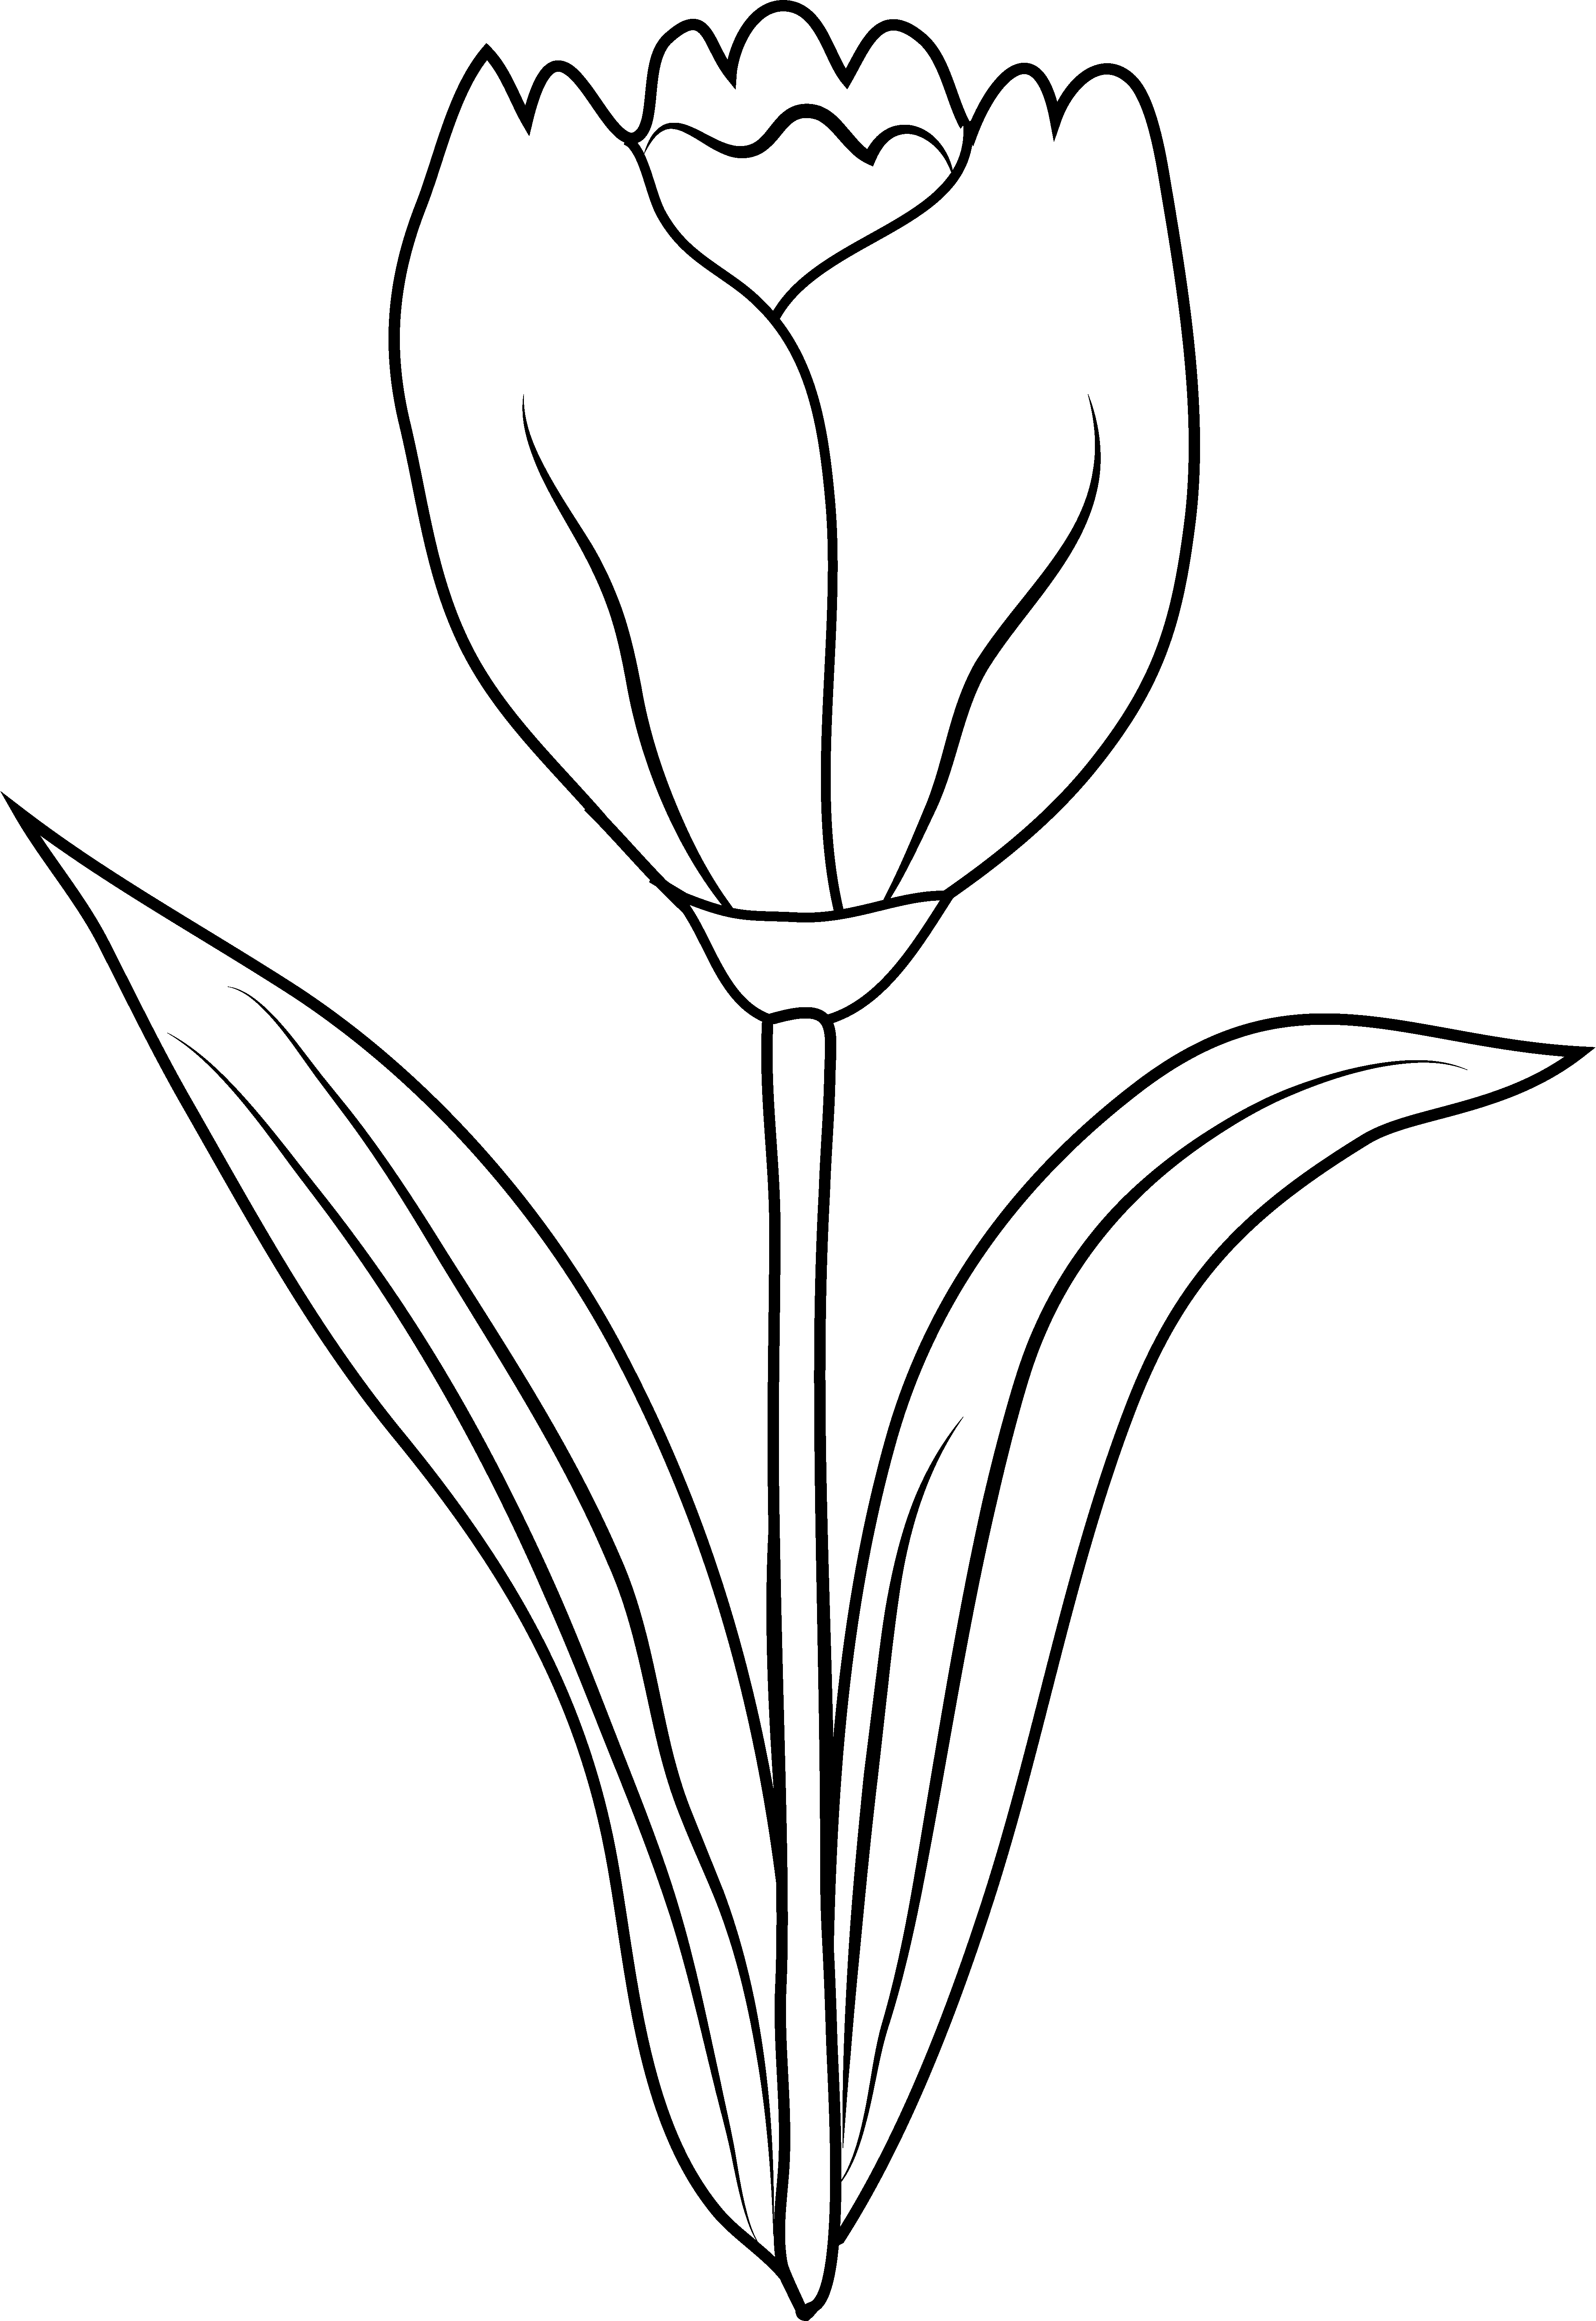 Tulip Flower Coloring Page - Free Clip Art